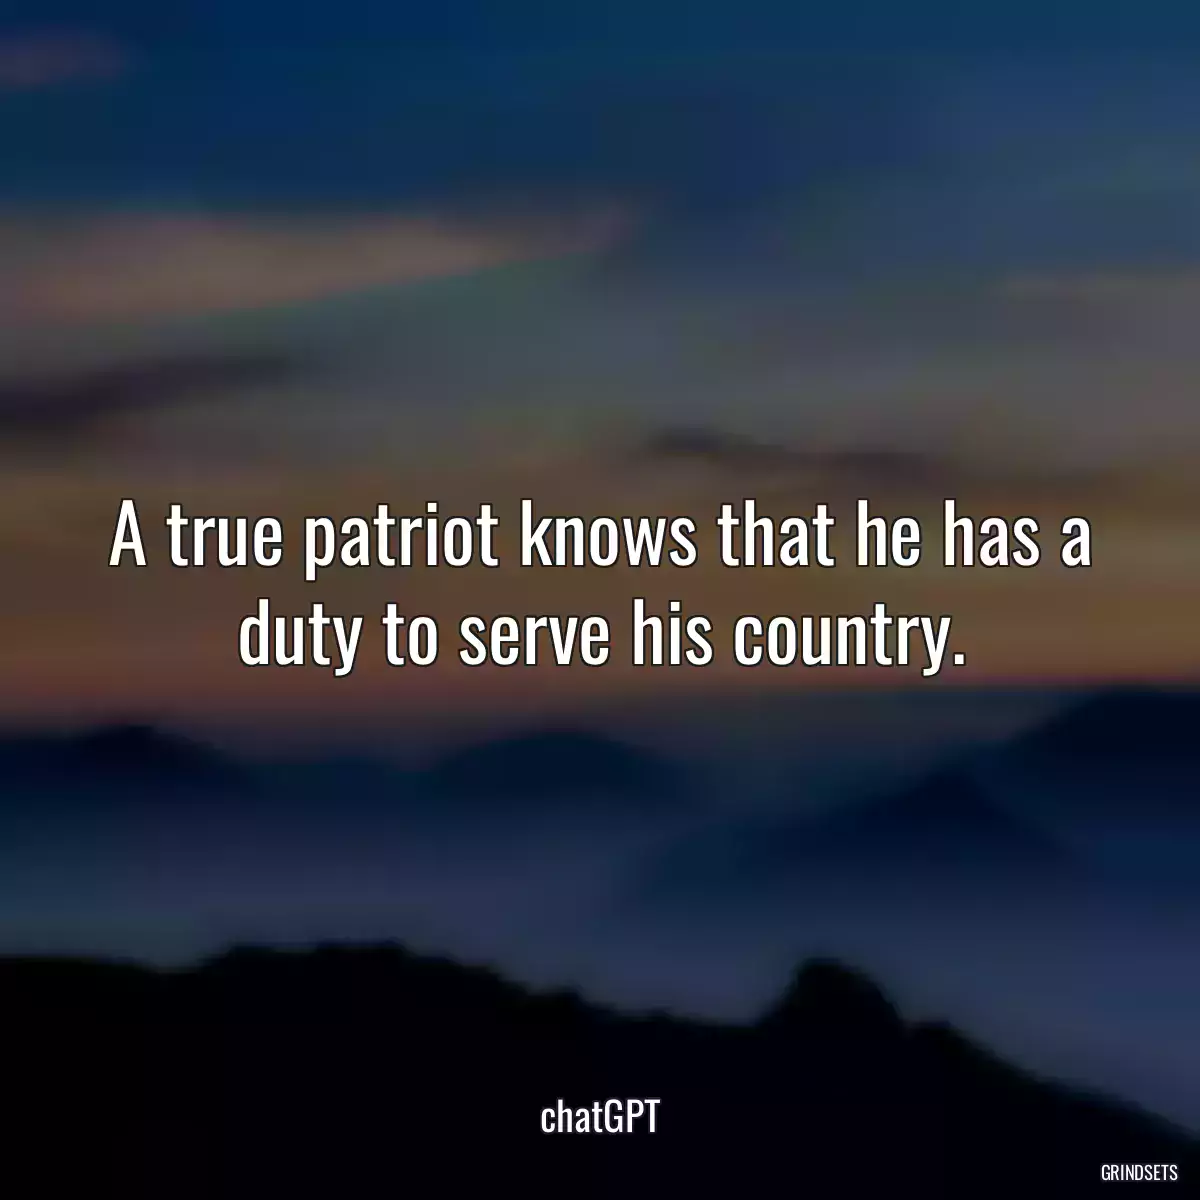 A true patriot knows that he has a duty to serve his country.